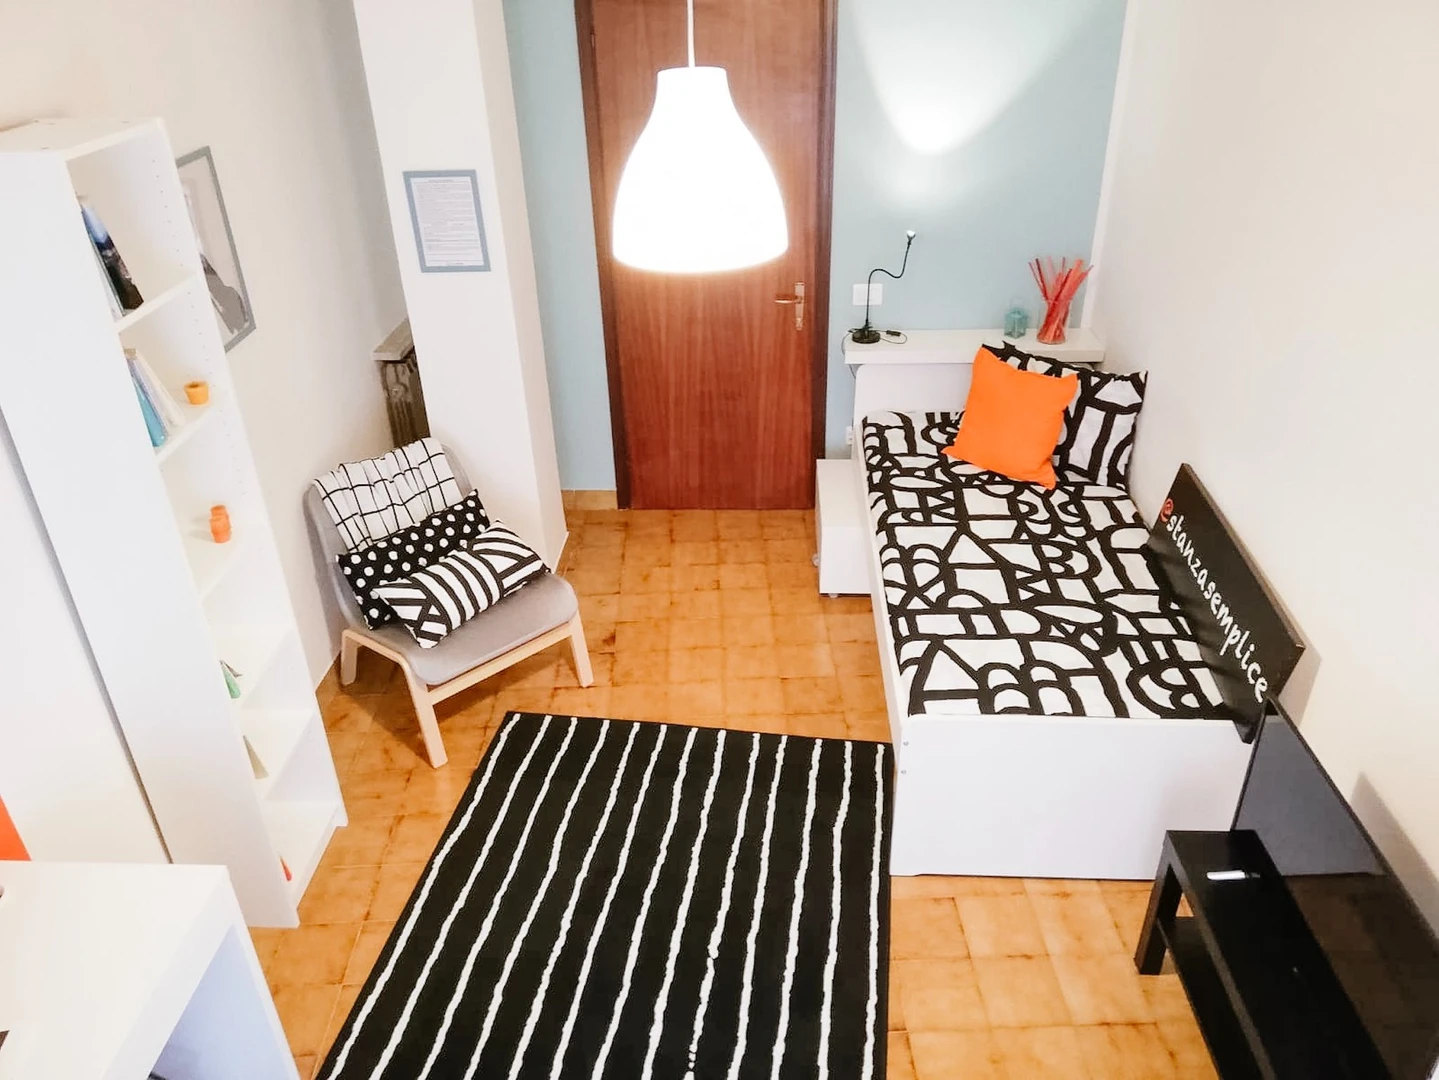 Renting rooms by the month in Verona